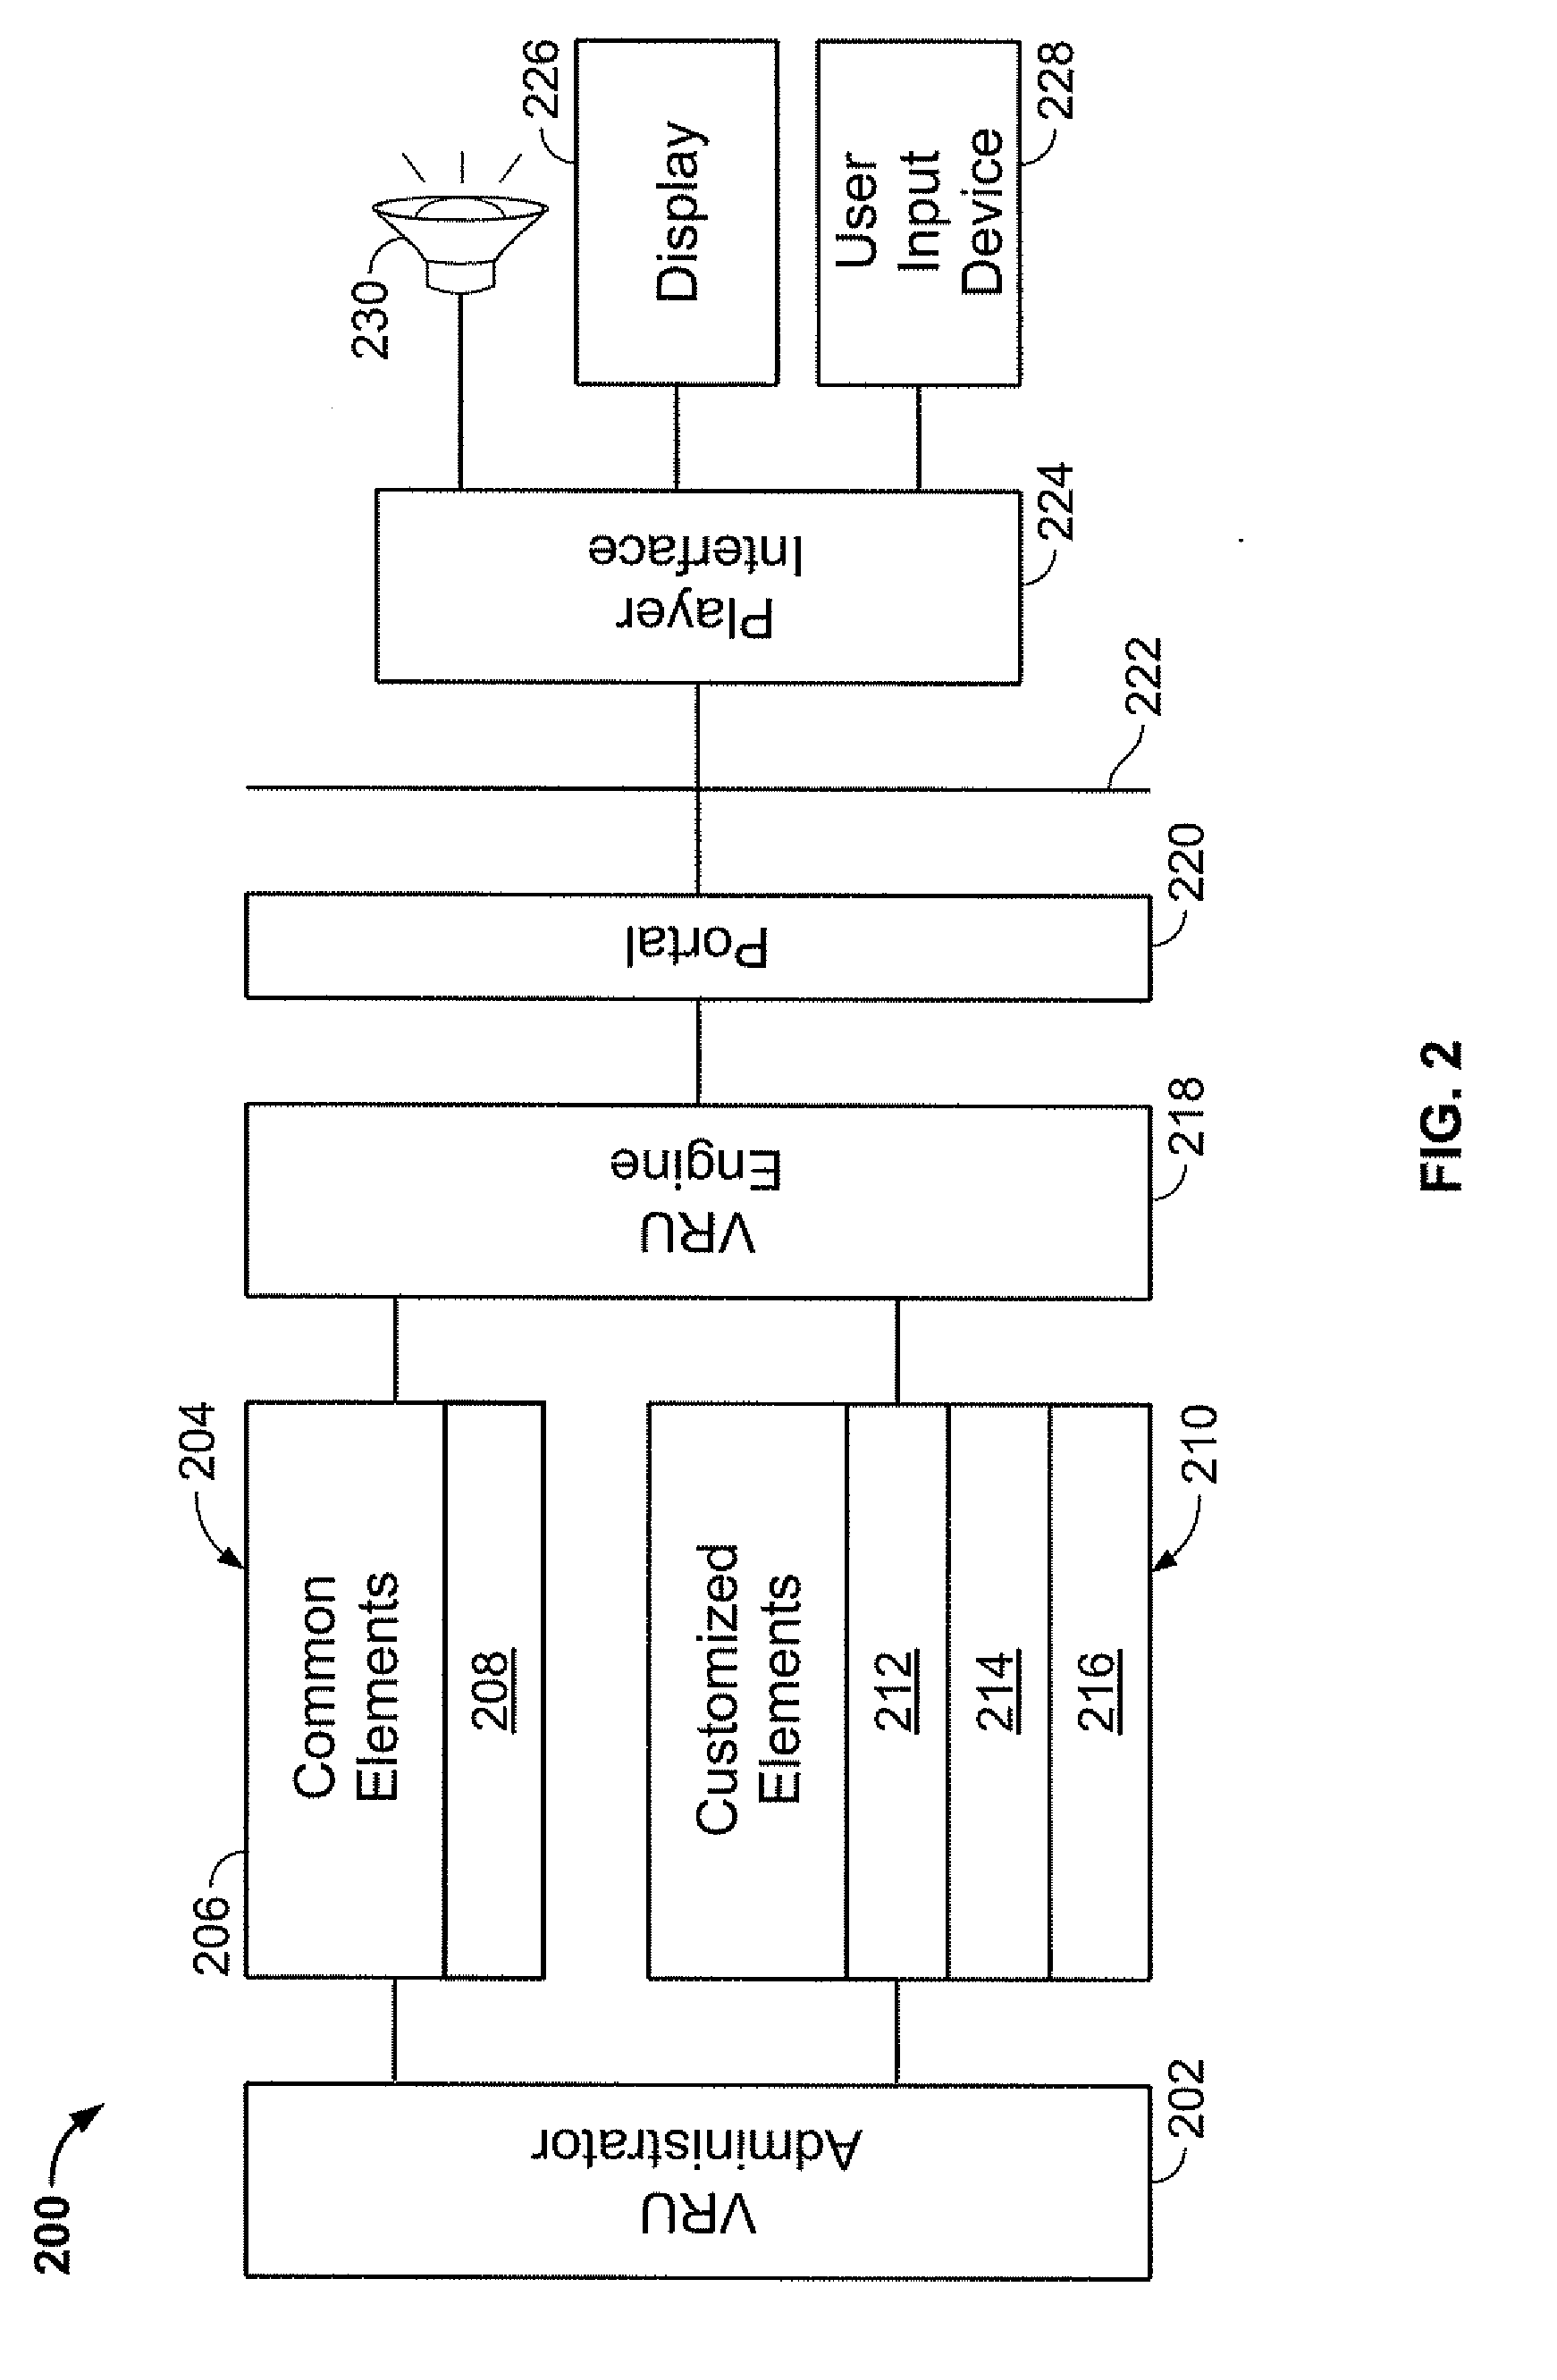 Computer Simulation Method With User-Defined Transportation And Layout